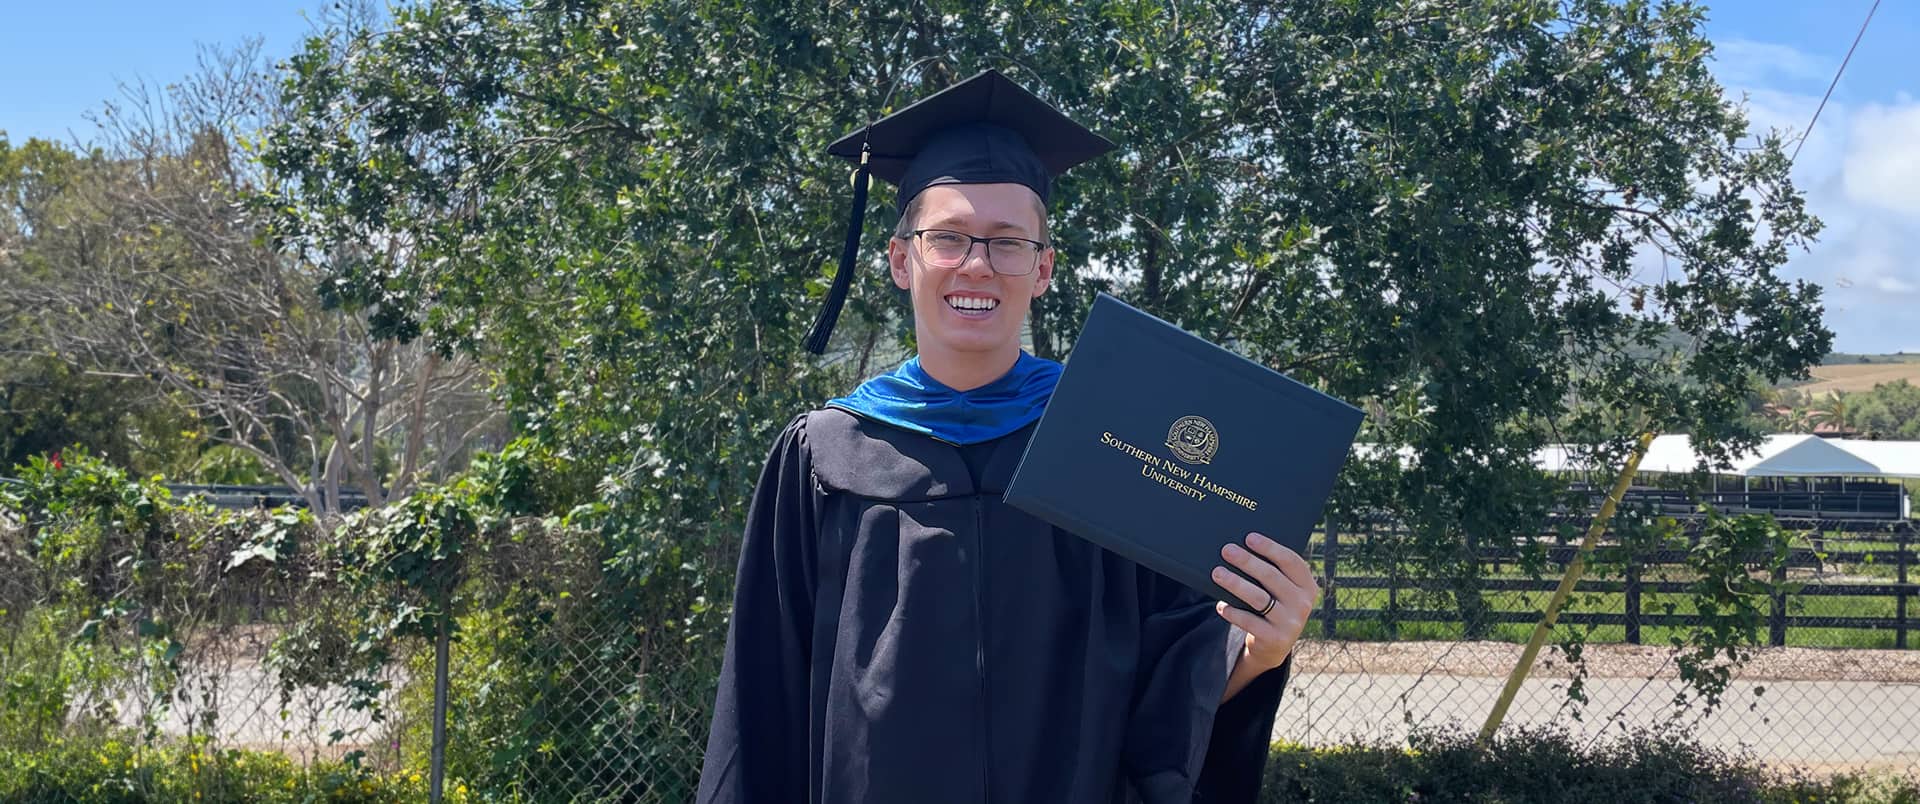 Matthew Daigneau, who earned his degree from SNHU, standing outside in front of a small tree wearing his cap and gown and holding his diploma.